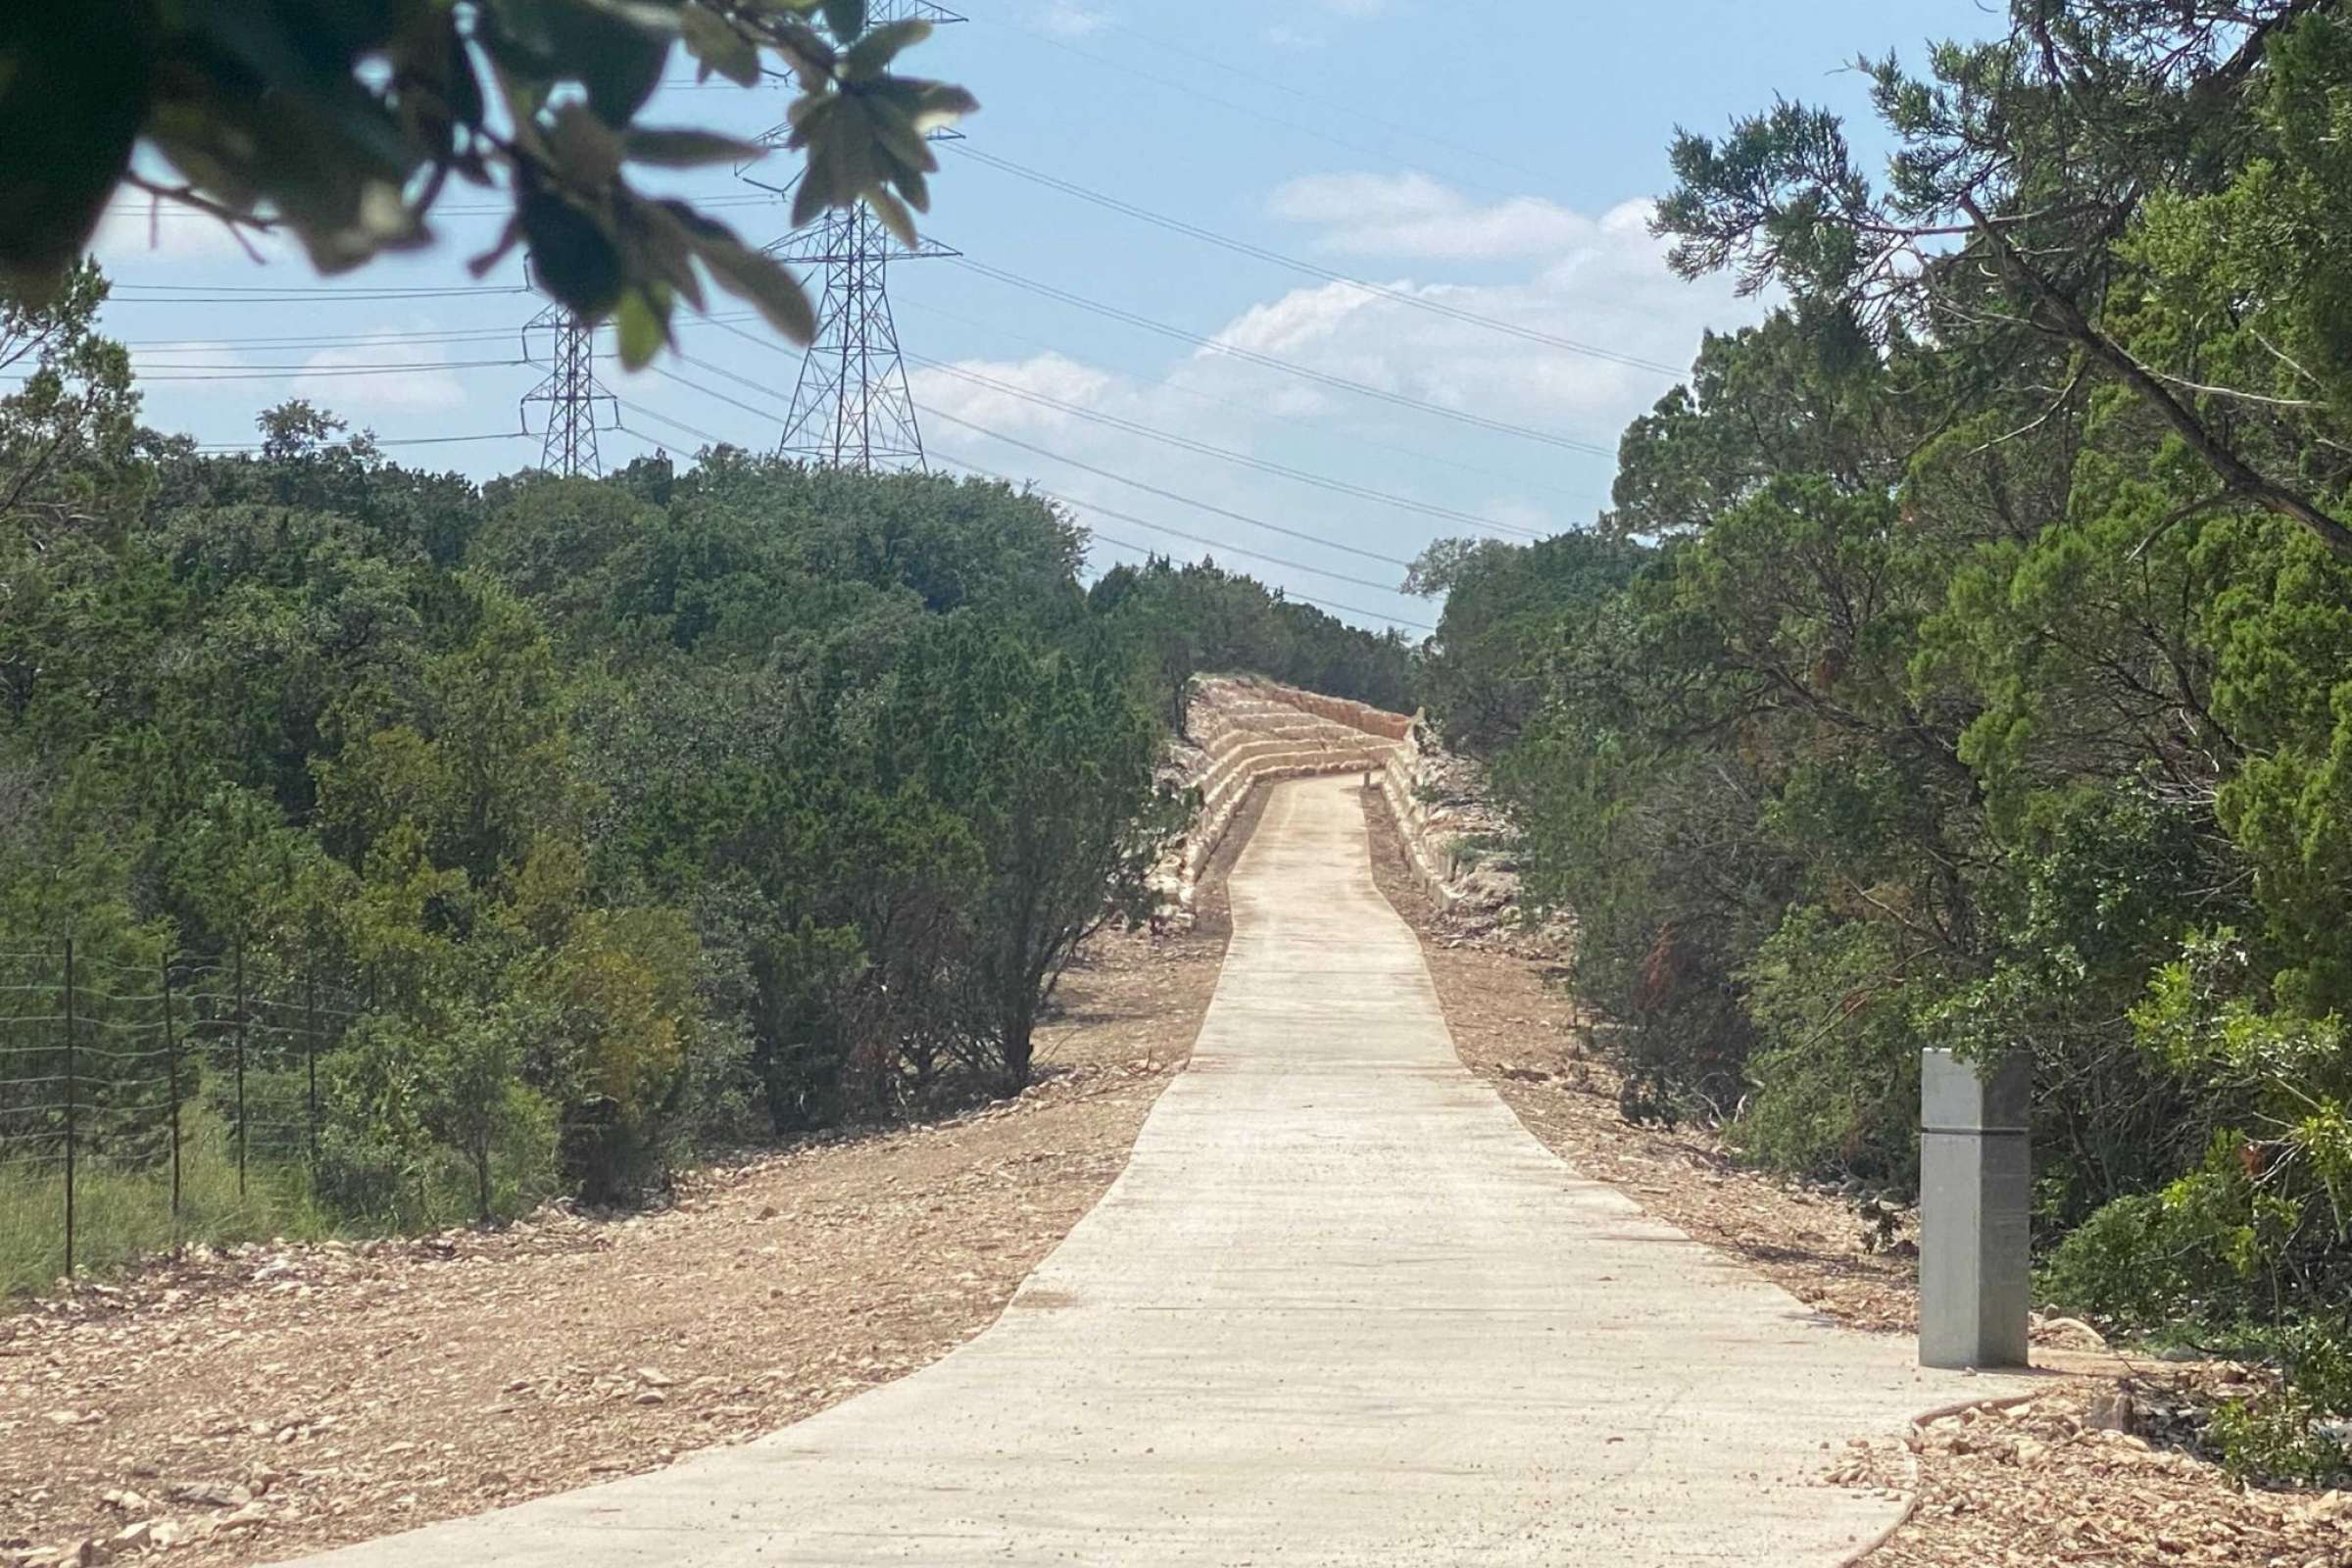 San Antonio’s Newest Trail Connects Eisenhower Park To The Rim, And It’s Opening Soon